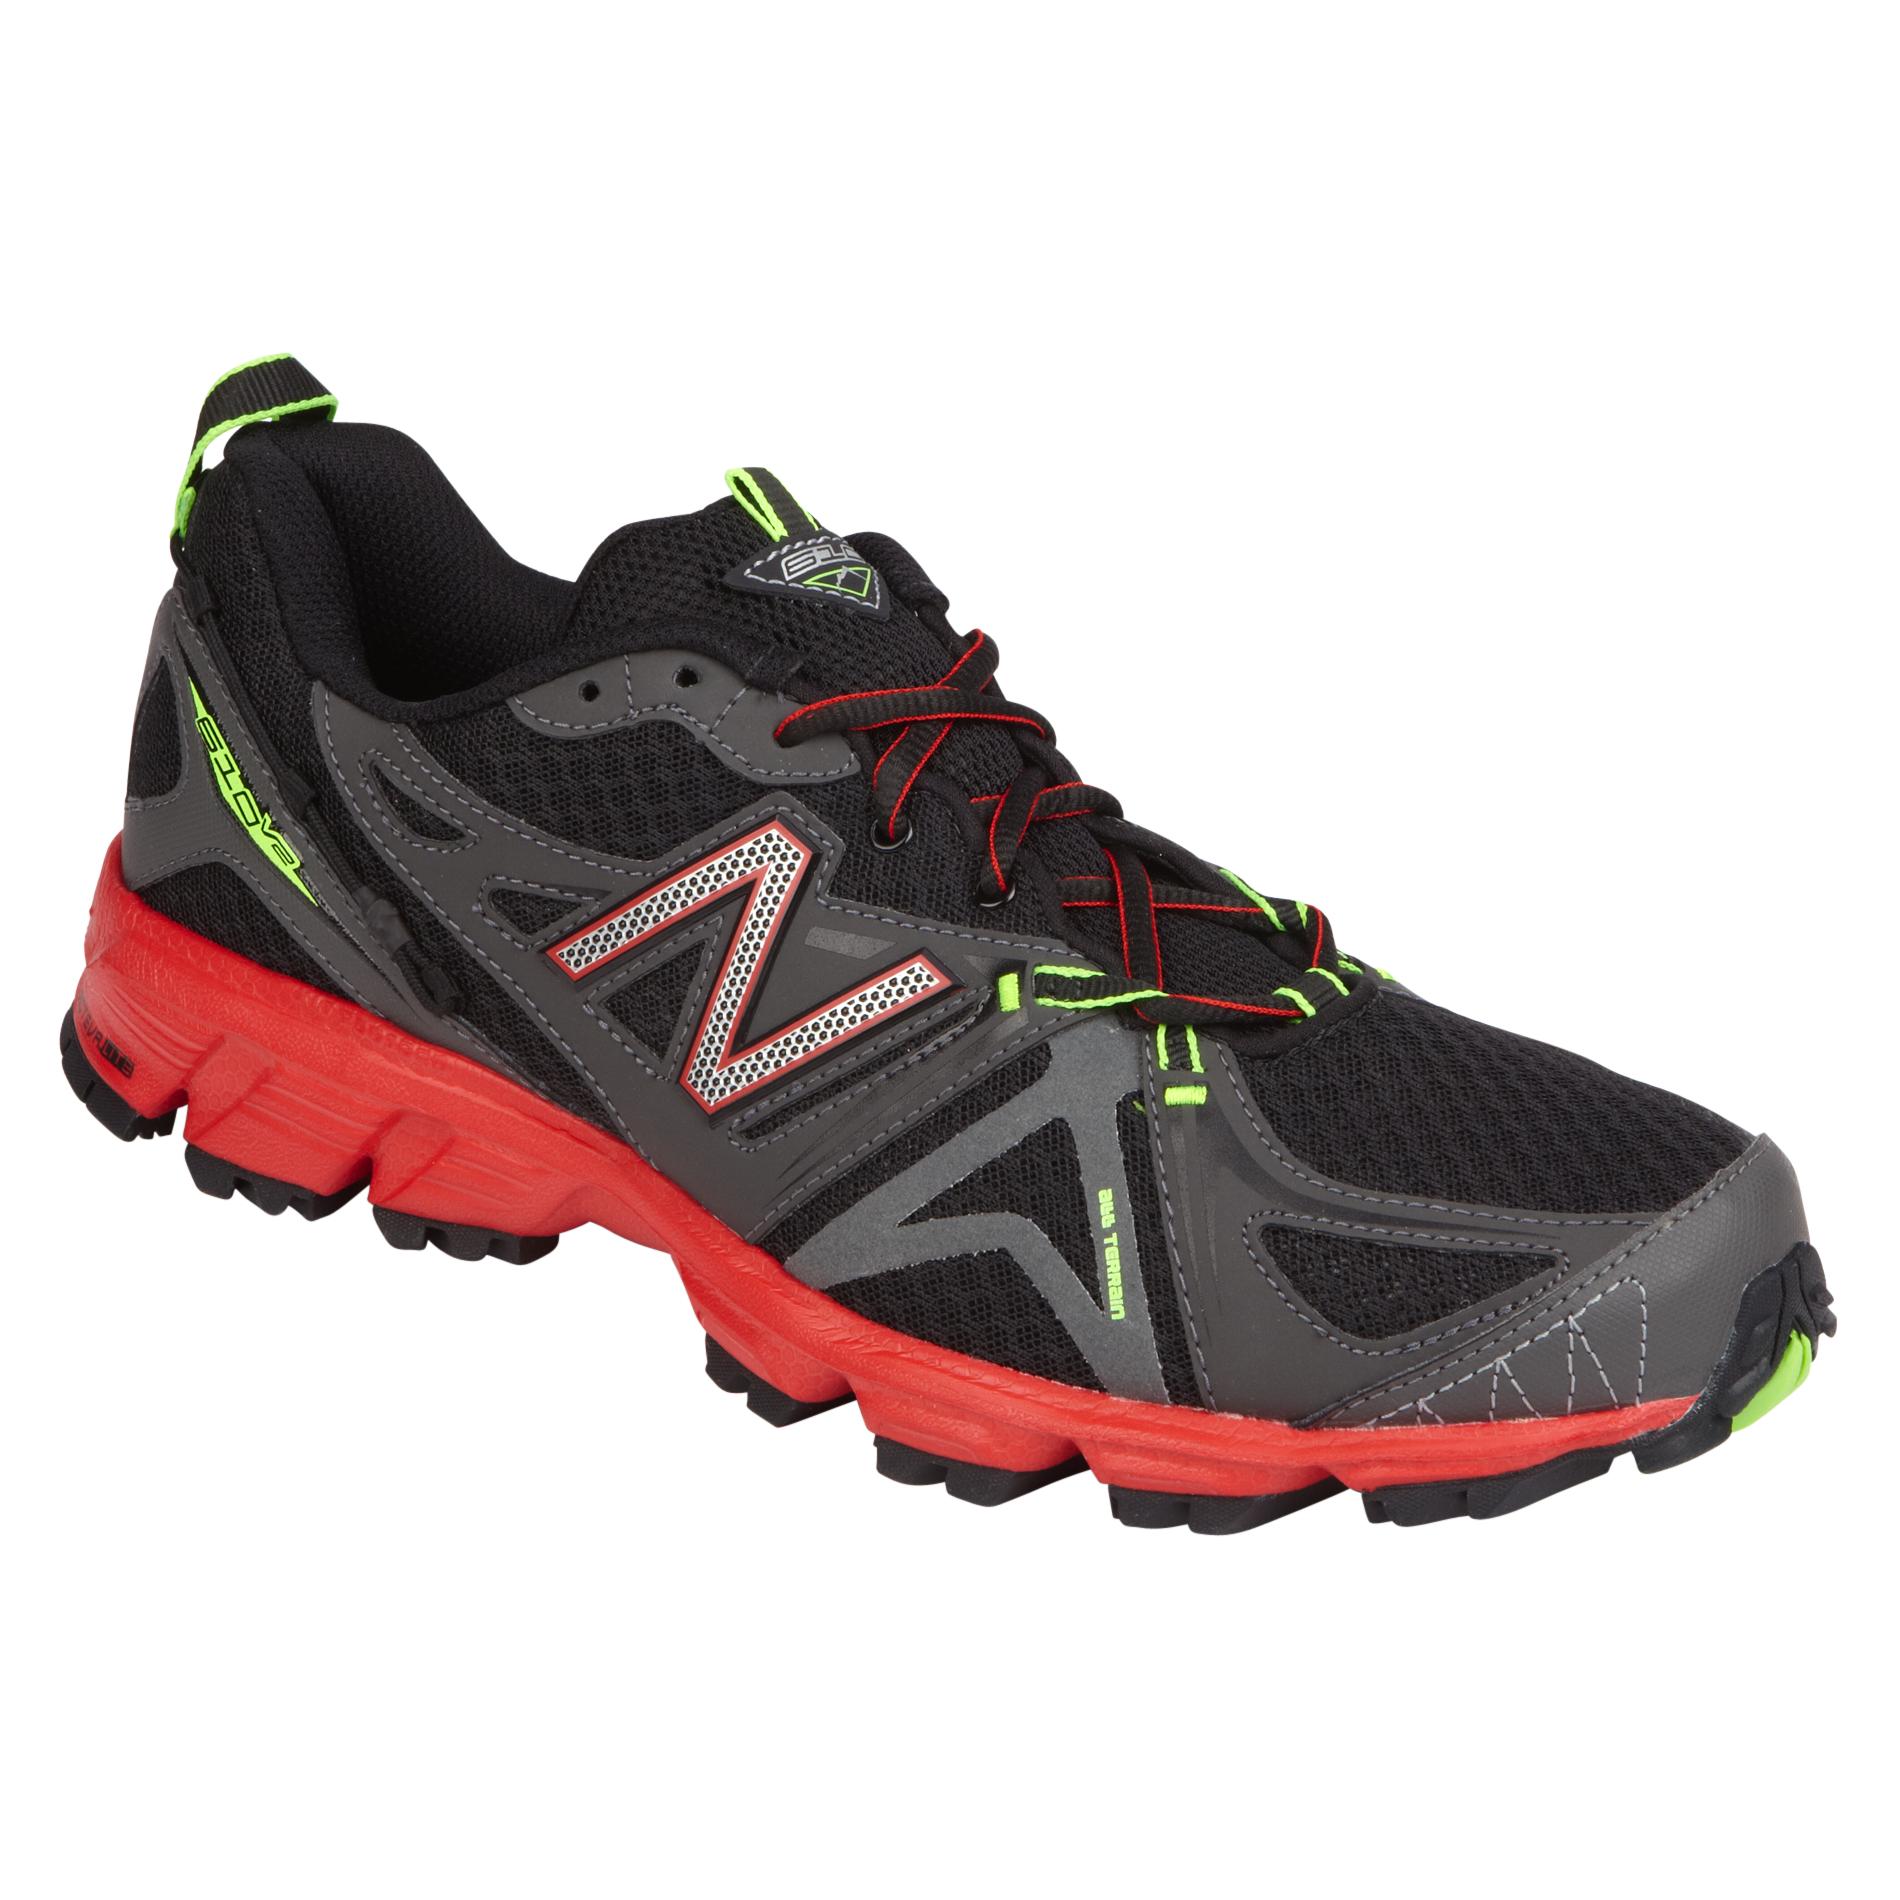 New Balance Men's 610 Trail Running Athletic Shoe Trail Wide Width - Grey/Red